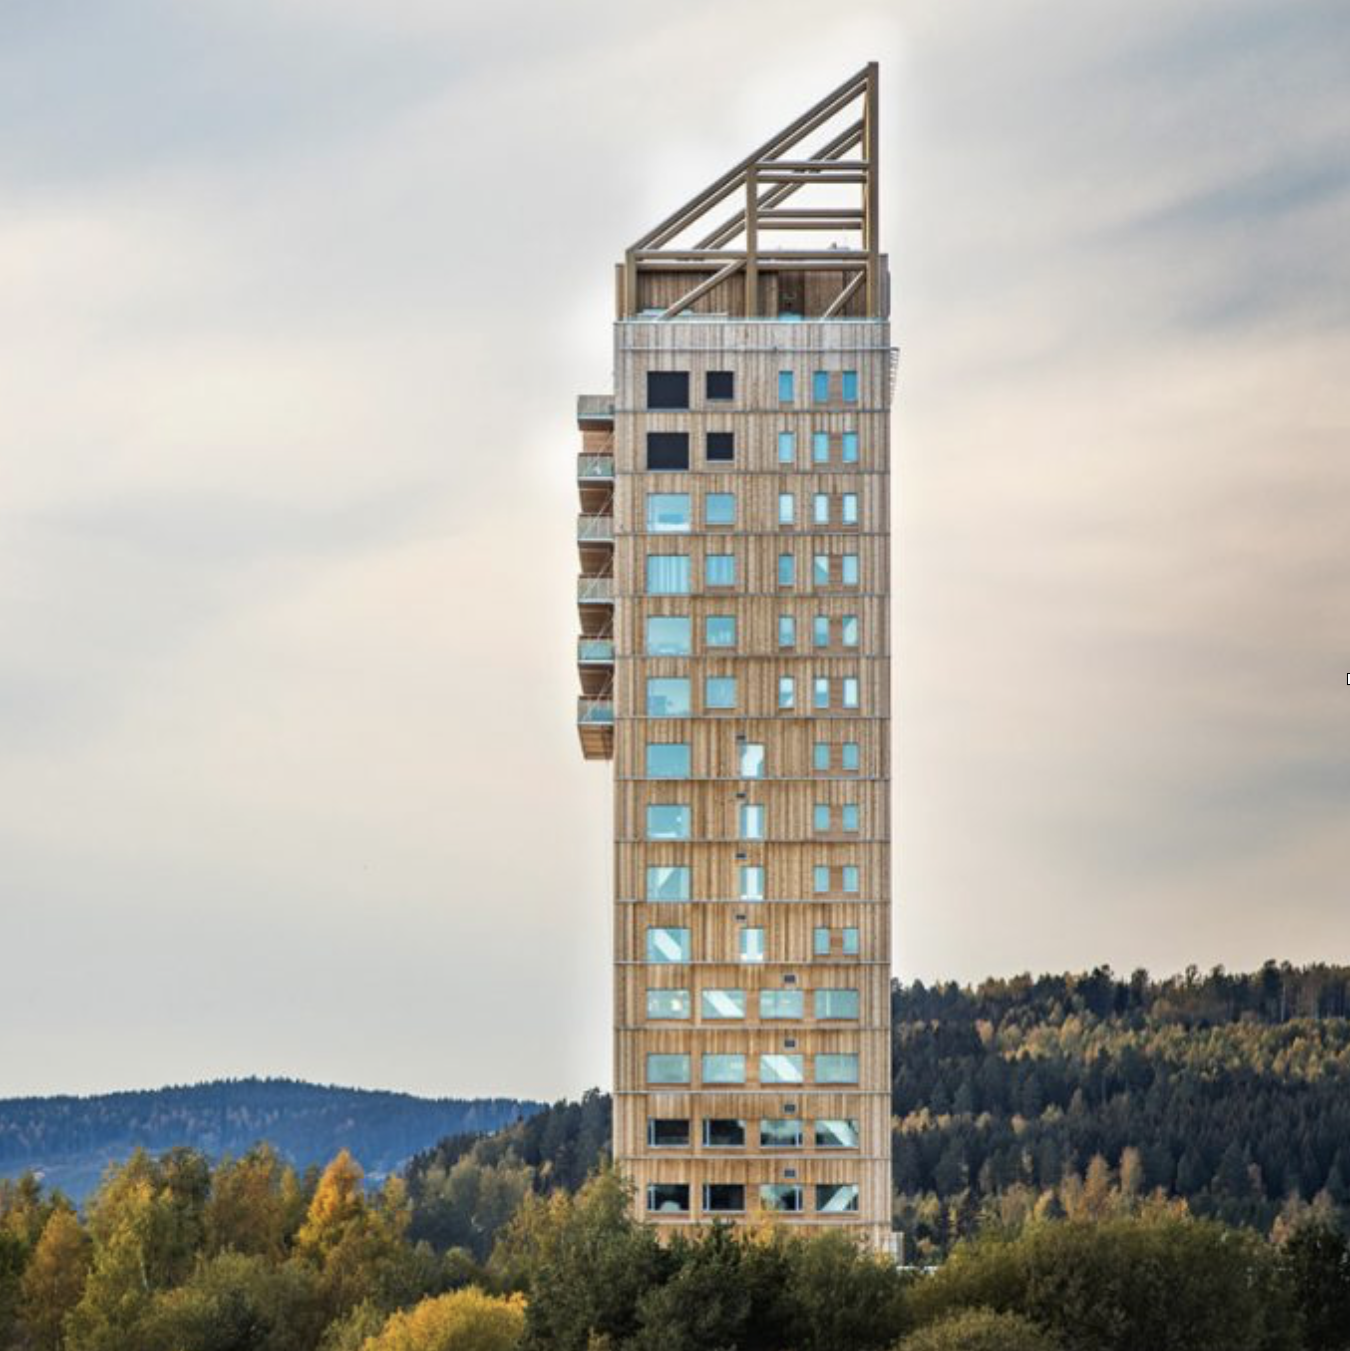 World's tallest timber tower in Norway